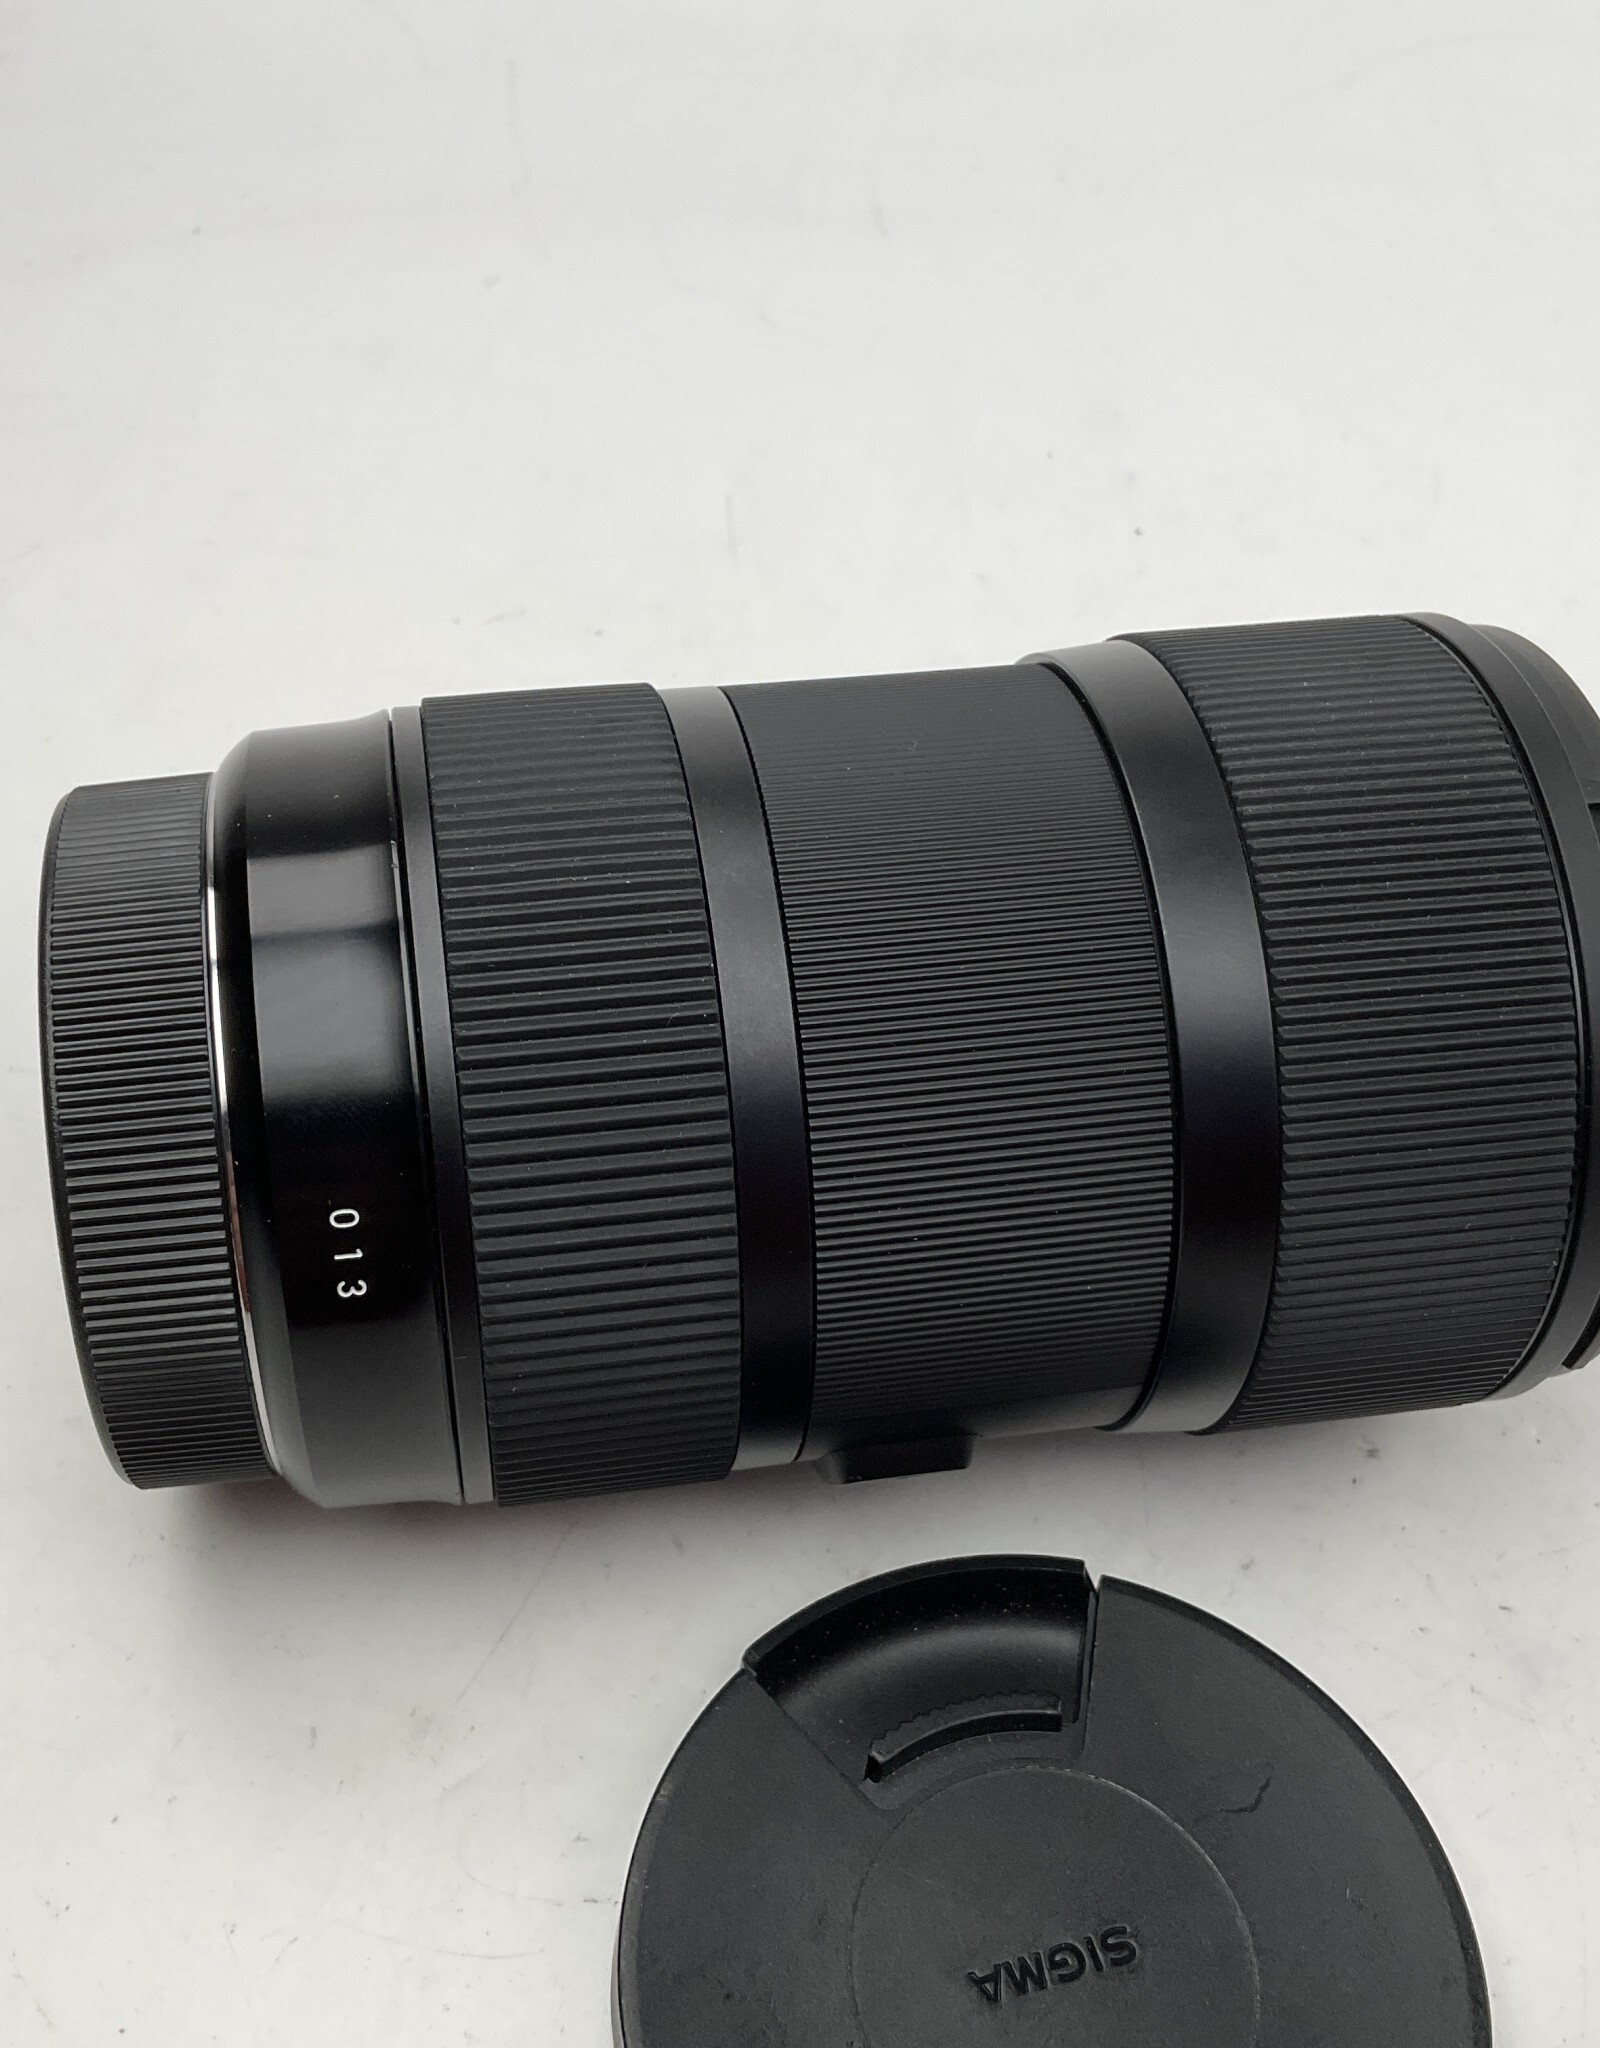 SIGMA Sigma Art 18-35mm f1.8 DC Lens No Hood for Canon Used Good